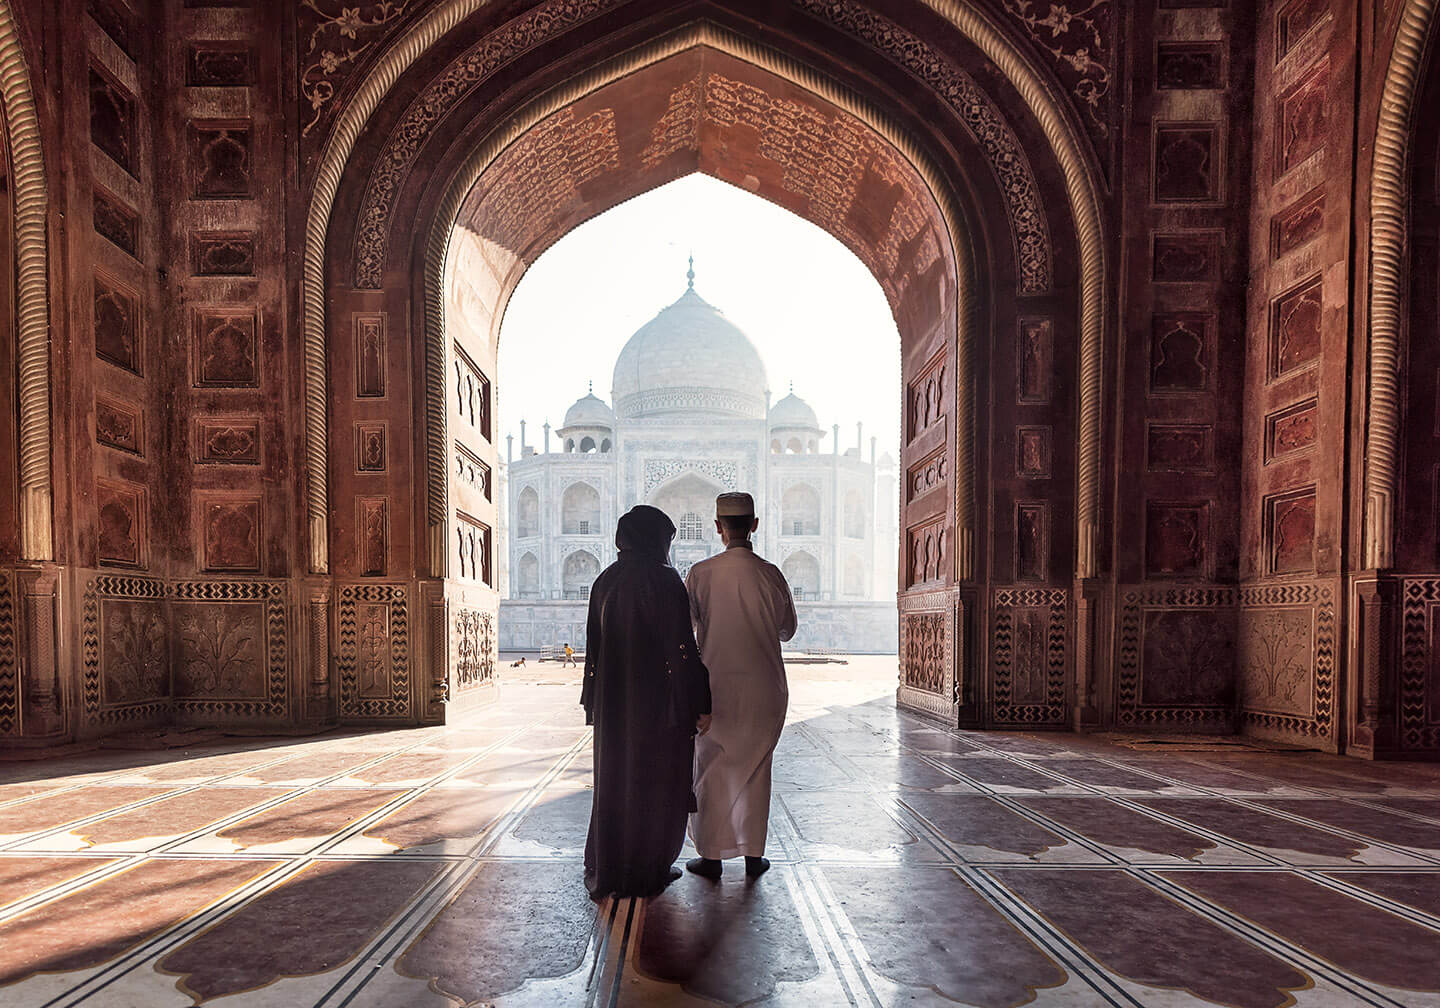 A young couple face away from the camera and pass under a large stone walkway to enter the stunning Taj Mahal in India.